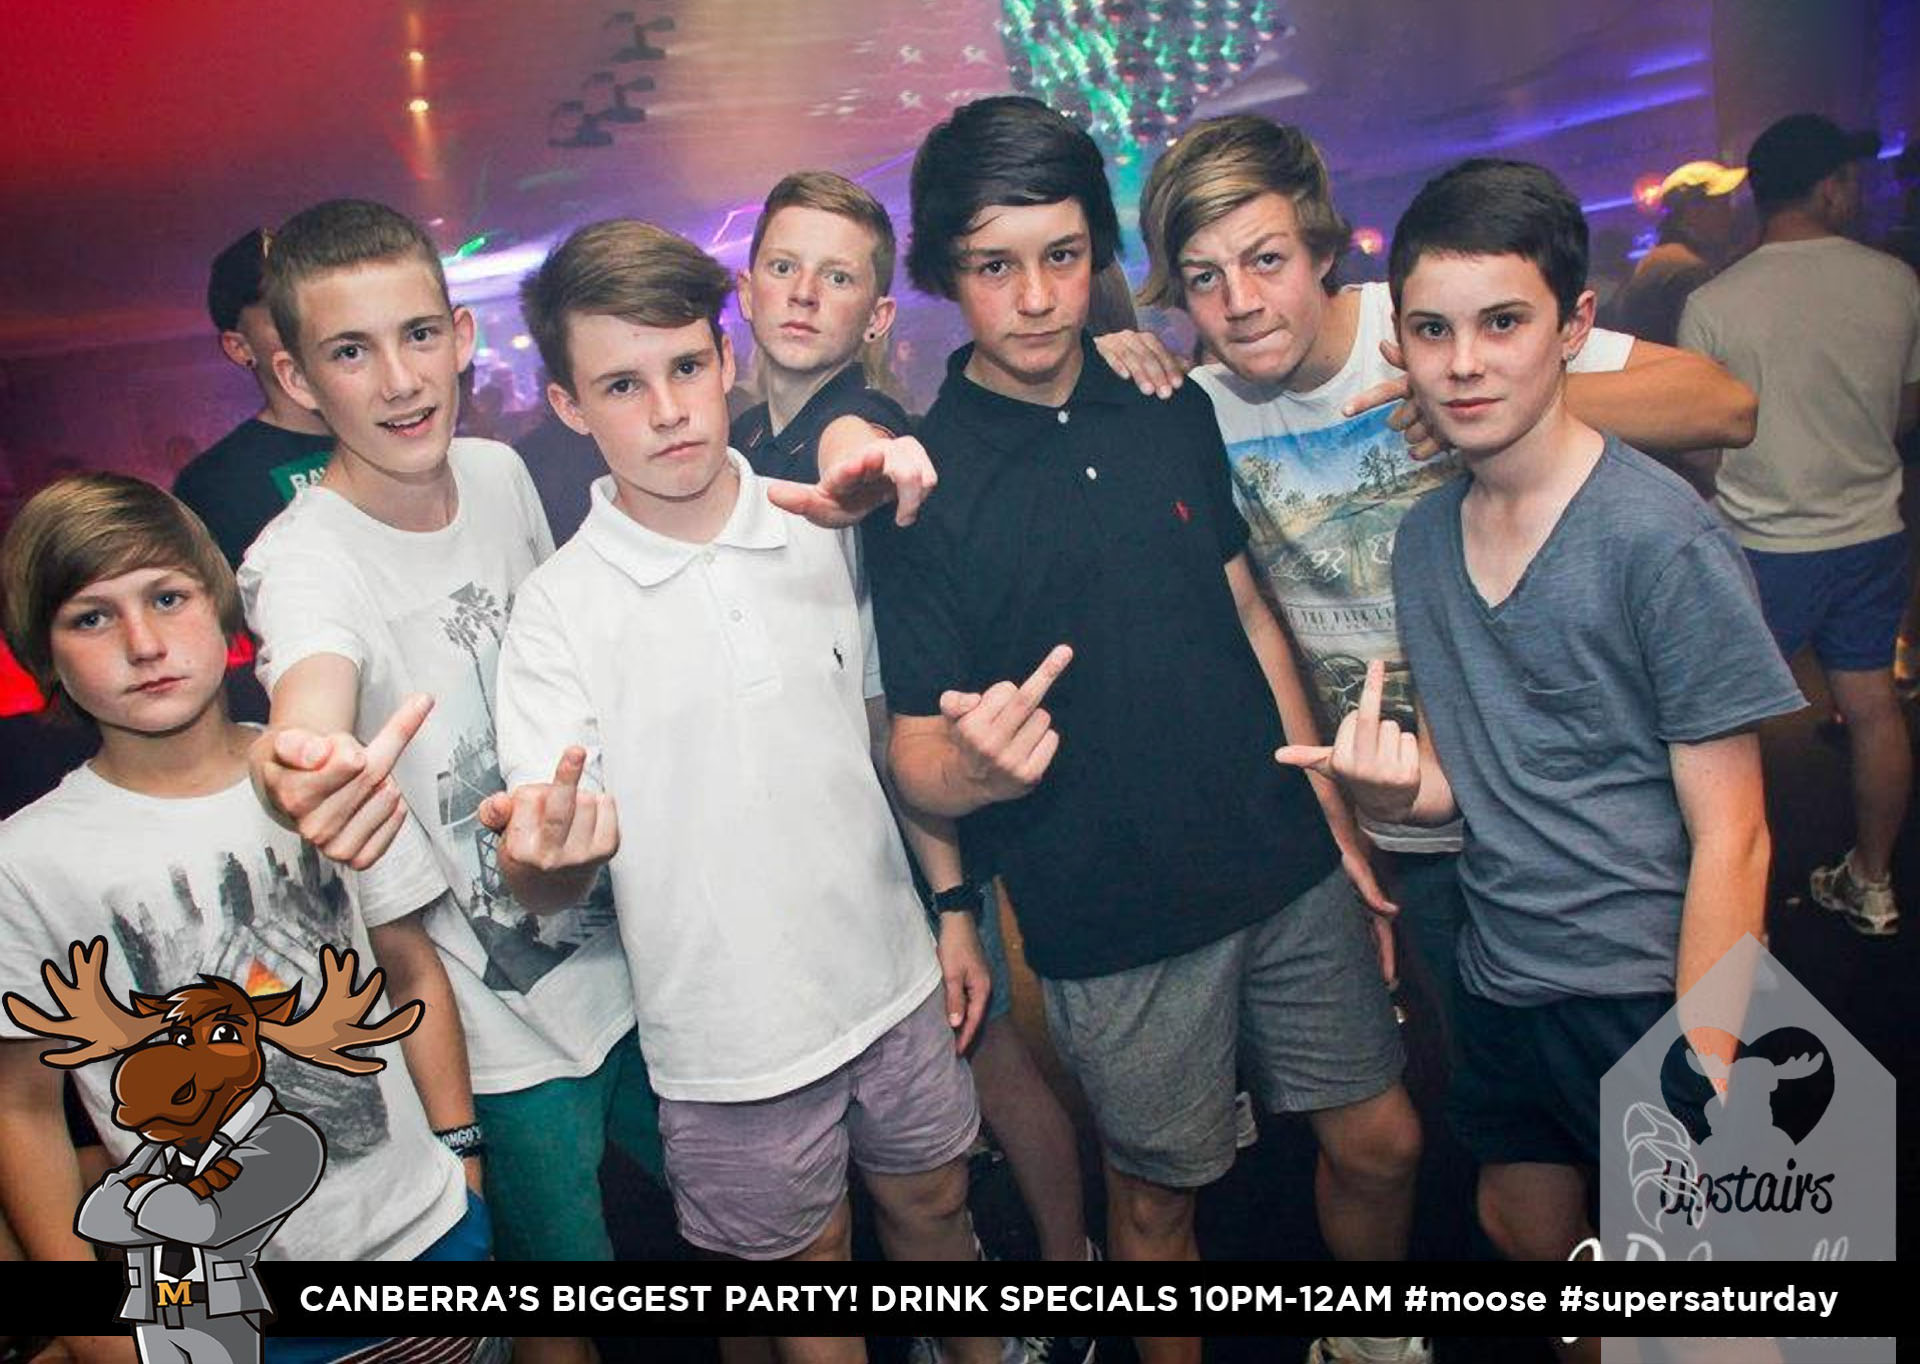 High Quality Pre-Teens Trying To Look Tough & Cool In A Nightclub Blank Meme Template